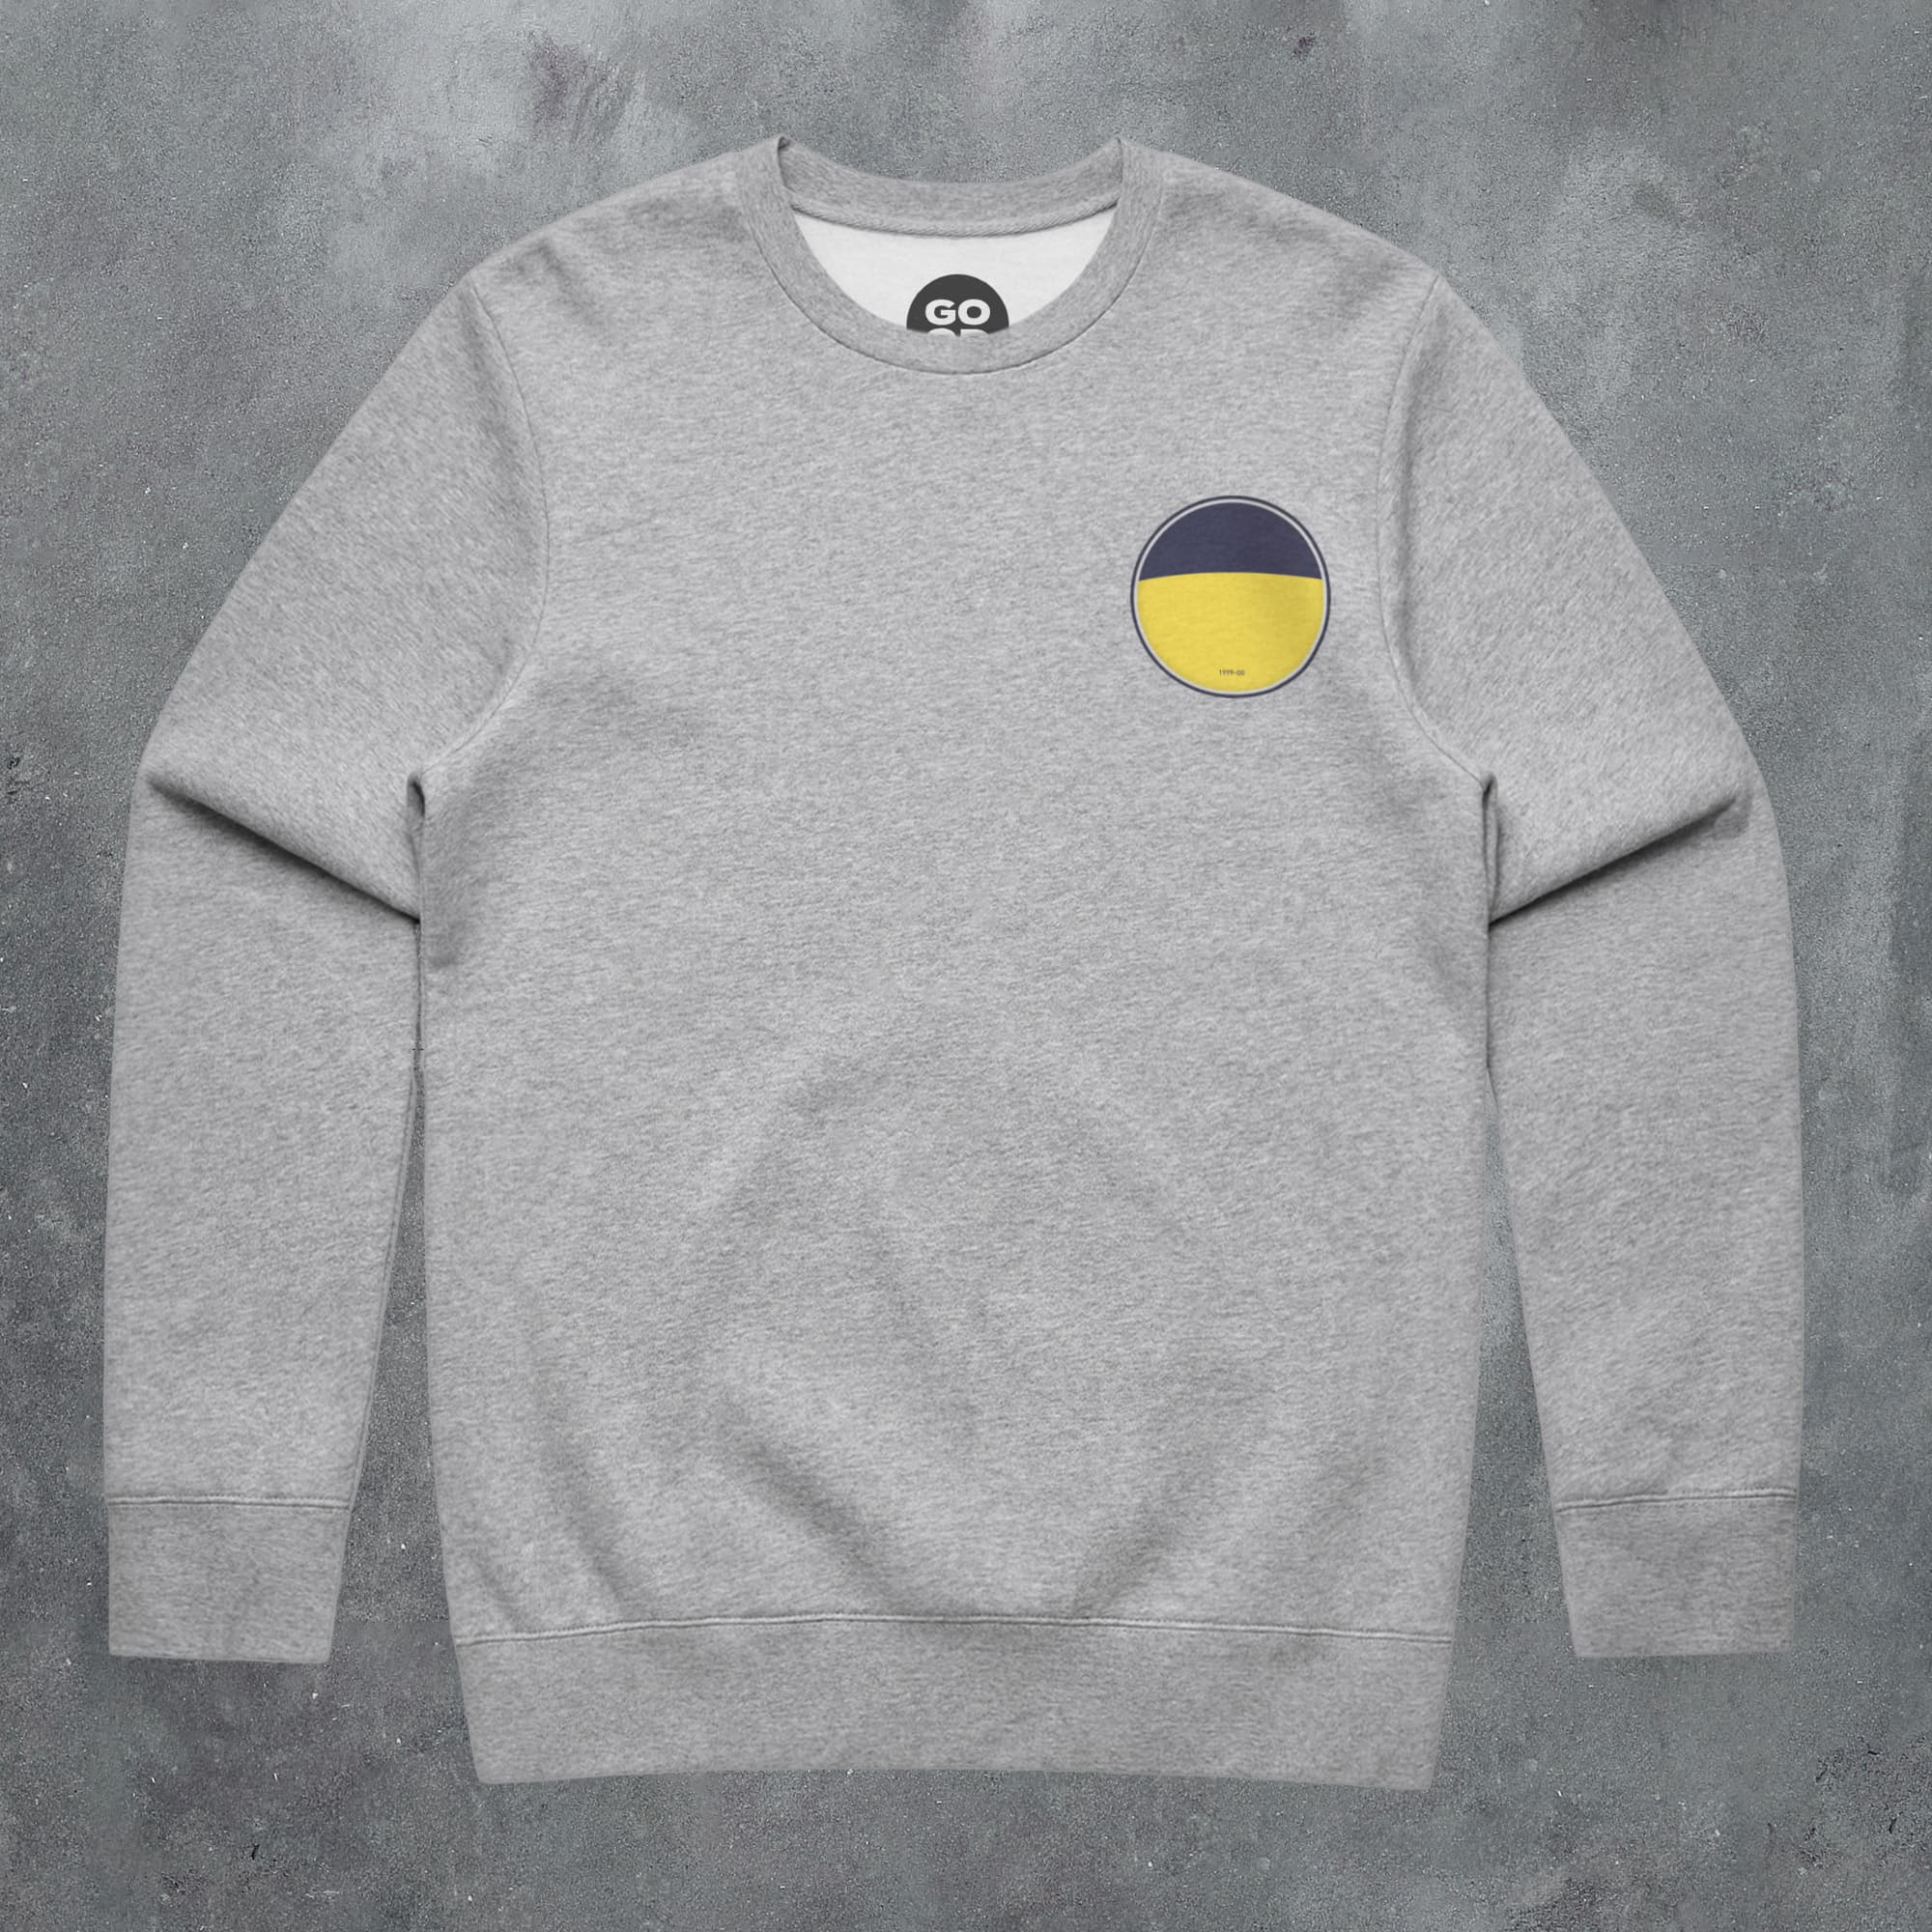 a grey sweatshirt with a yellow circle on the chest